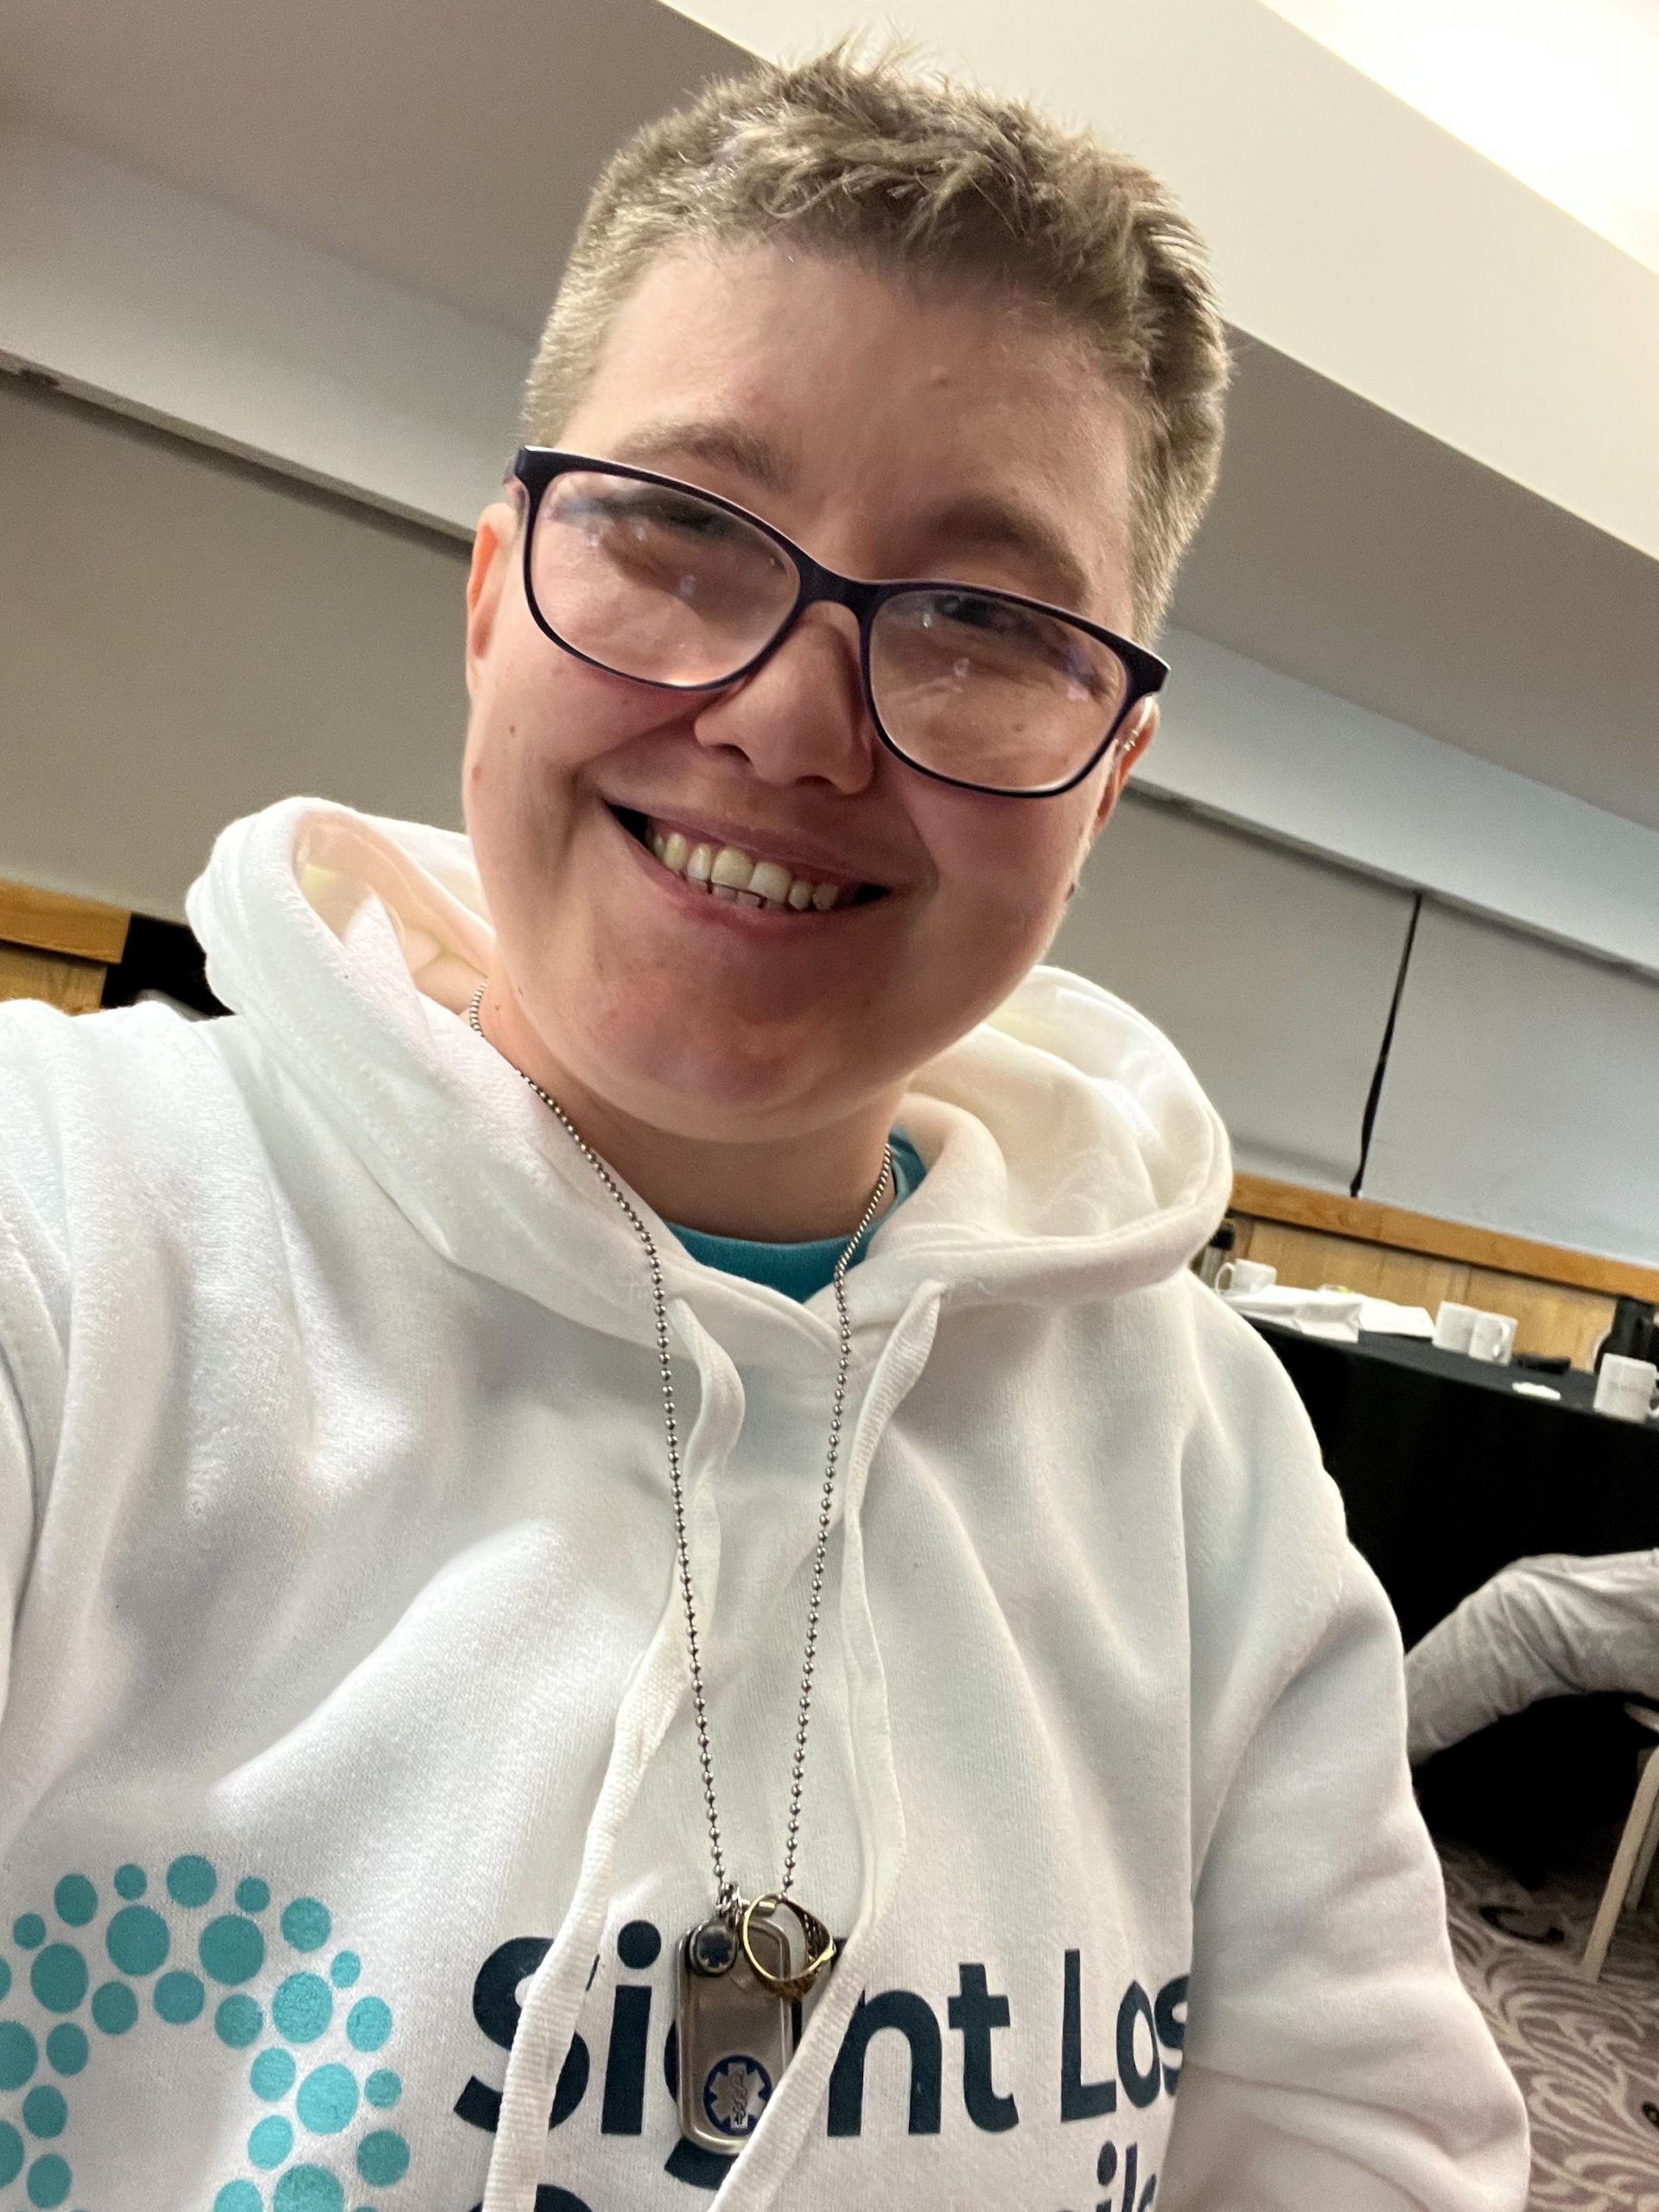 Bristol SLC member, Emma Blackmore is smiling at the camera in a selfie. She is wearing glasses and has her white SLC hoodie on.